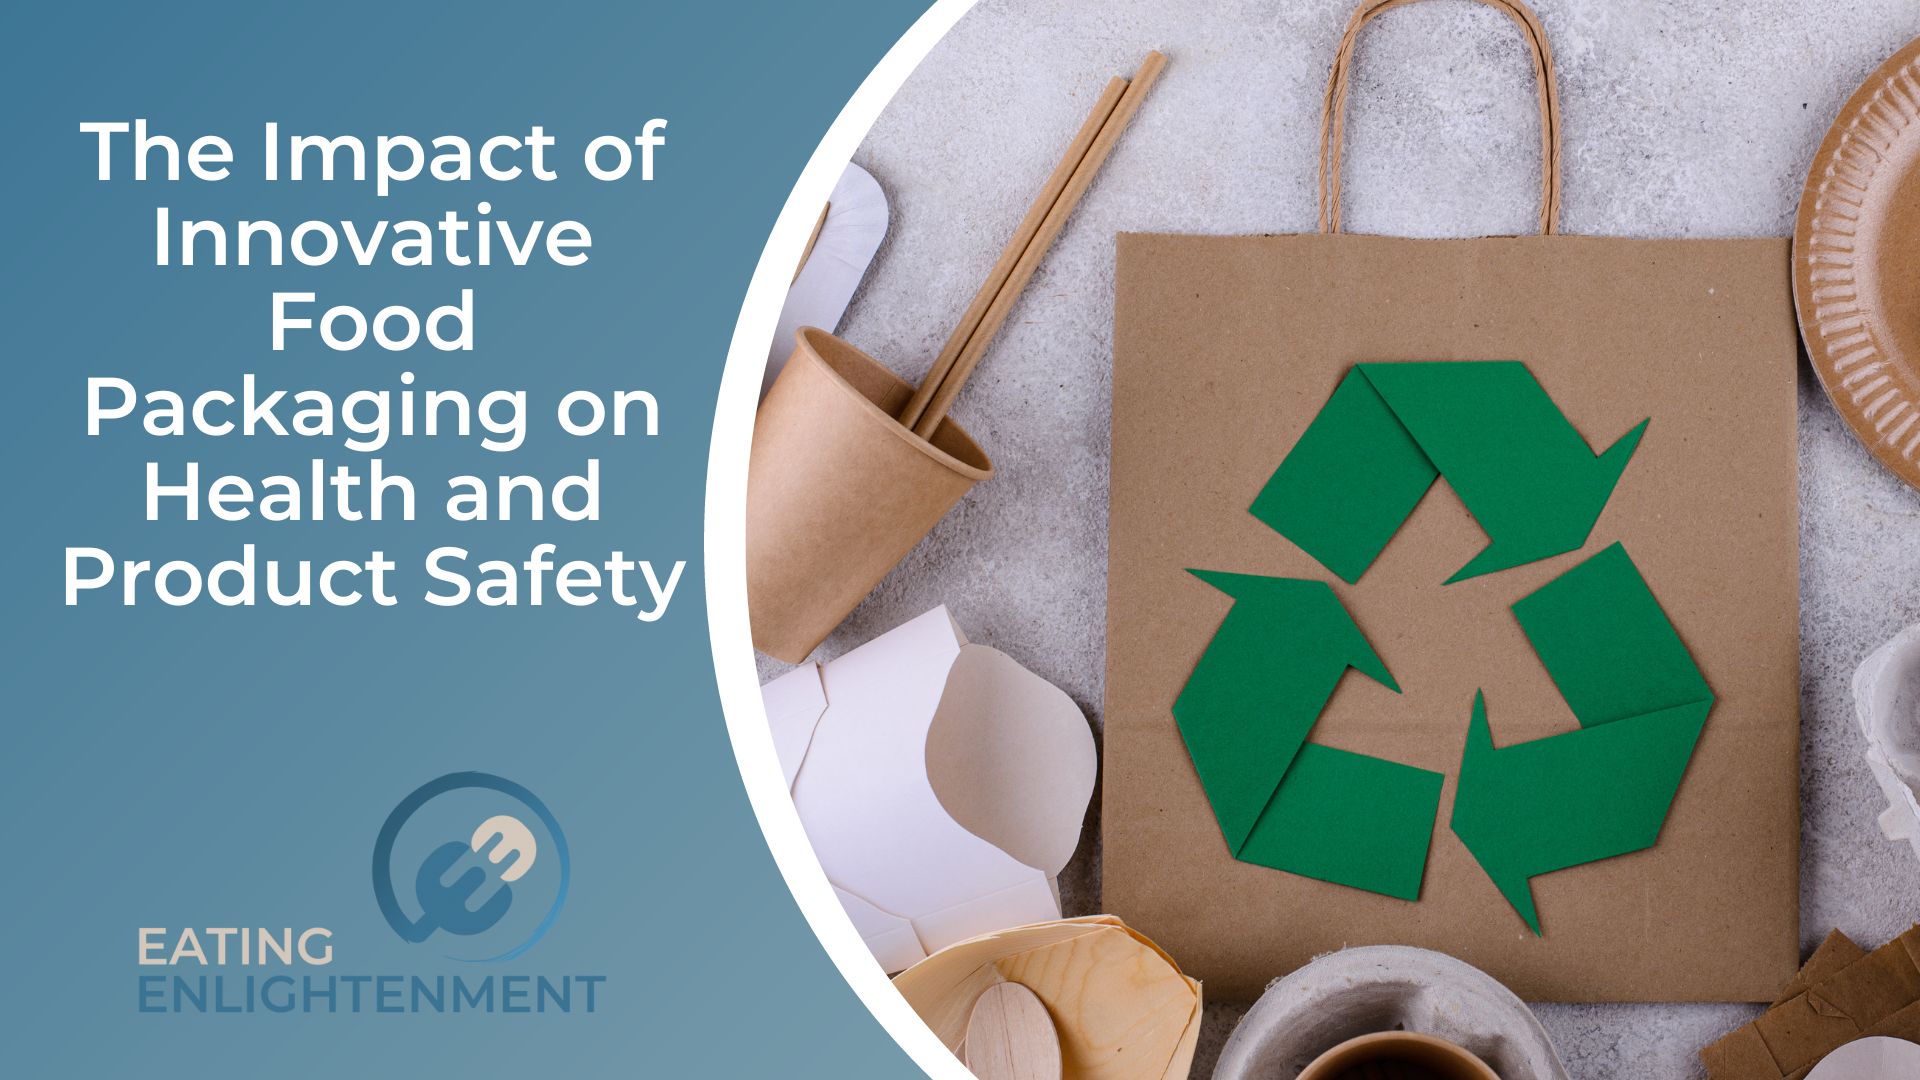 The Impact of Innovative Food Packaging on Health and Product Safety